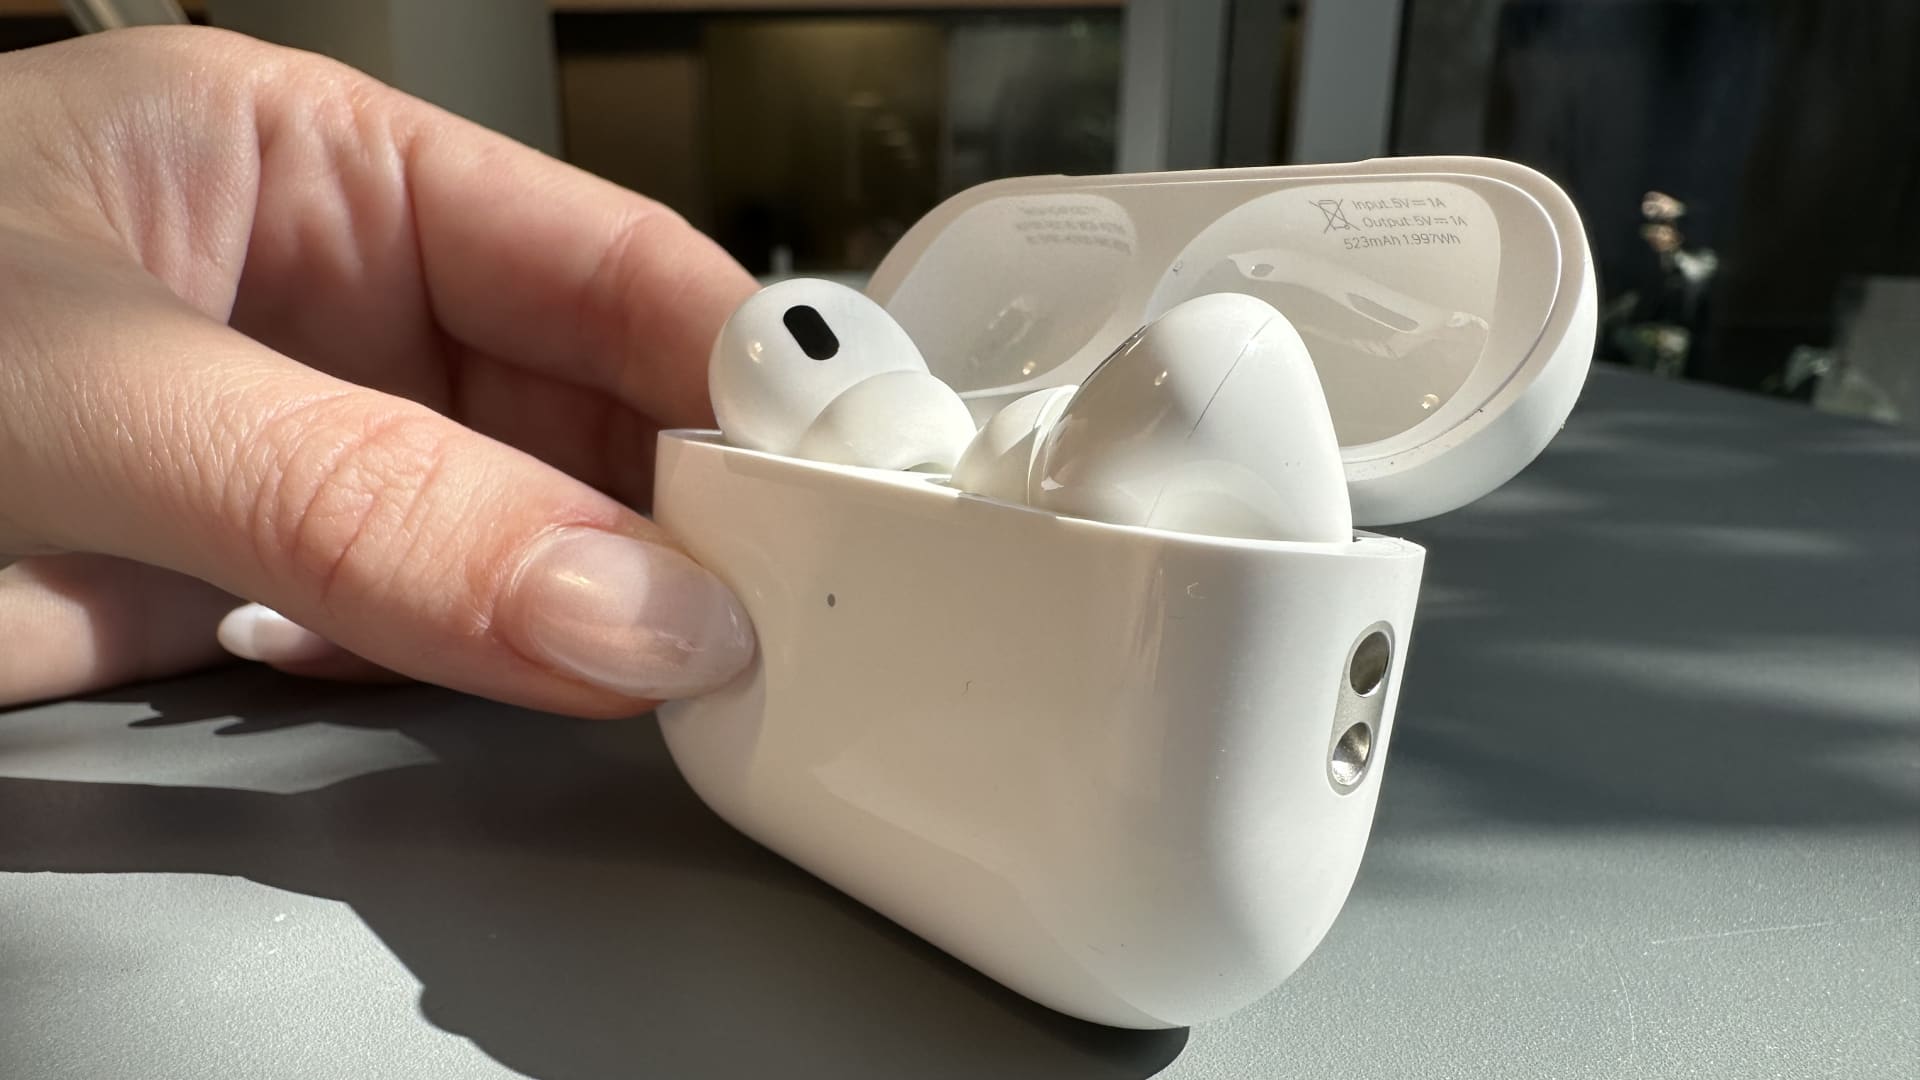 New AirPods Pro review: A must buy, even if have the older Pros